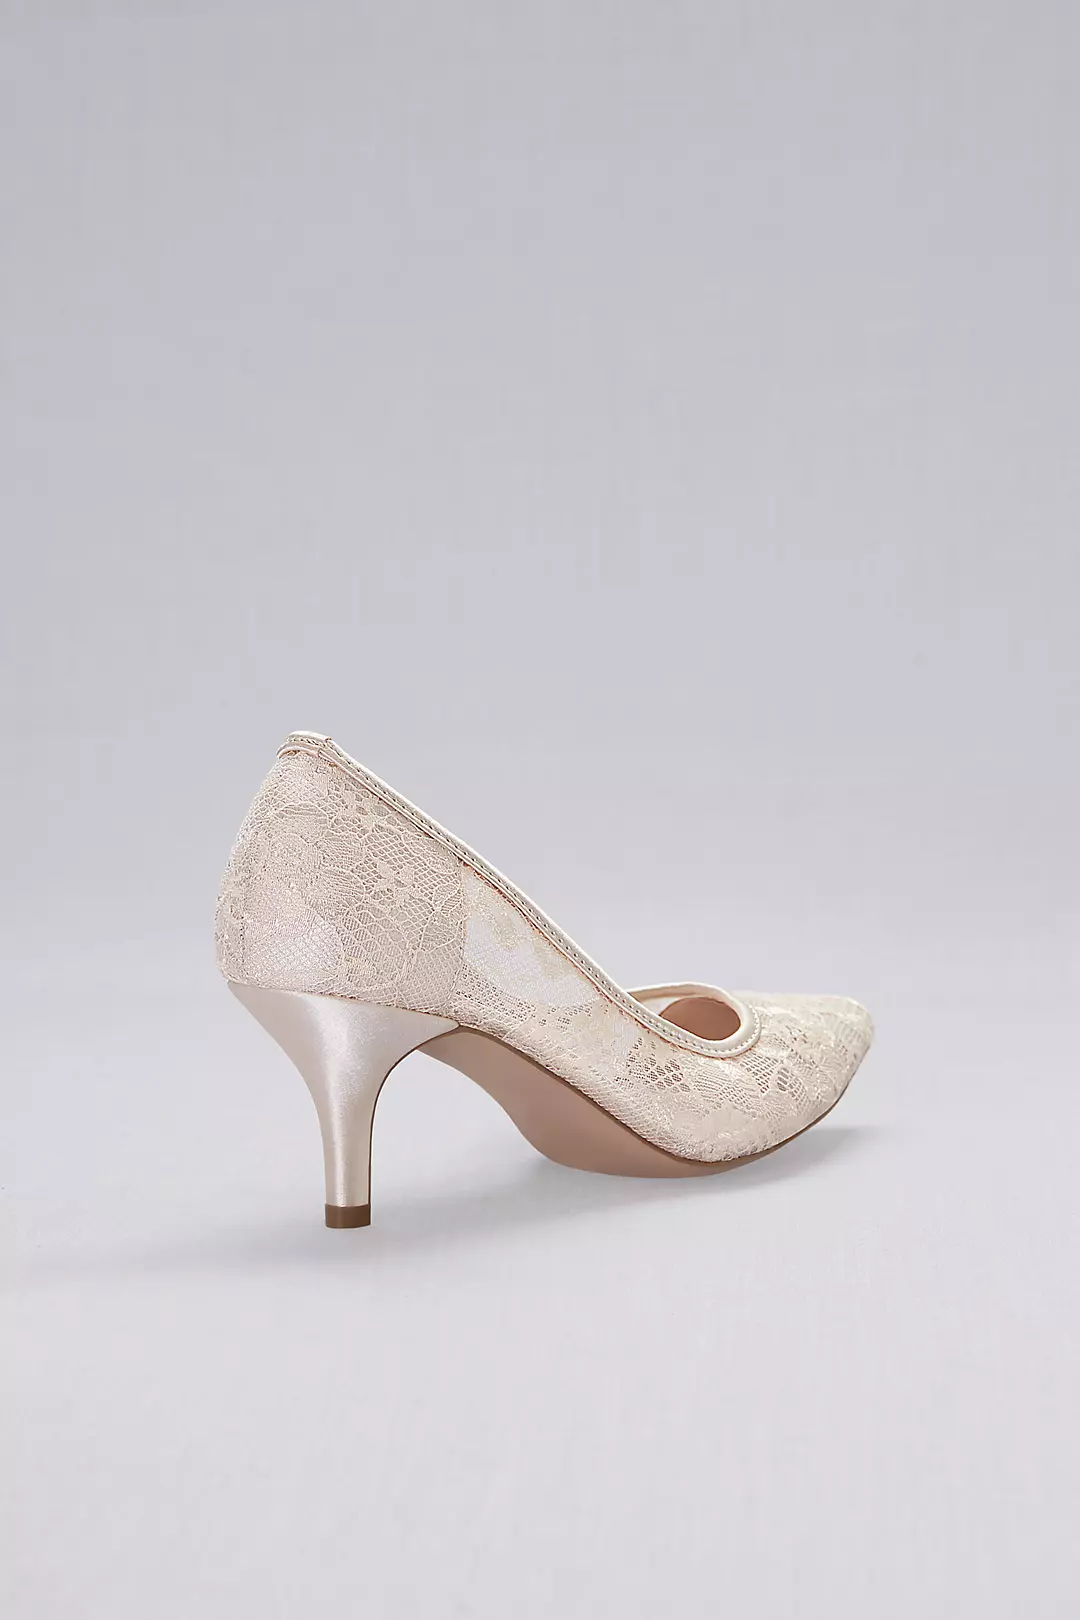 Lace Pointed-Toe Mid-Heel Pumps Image 2